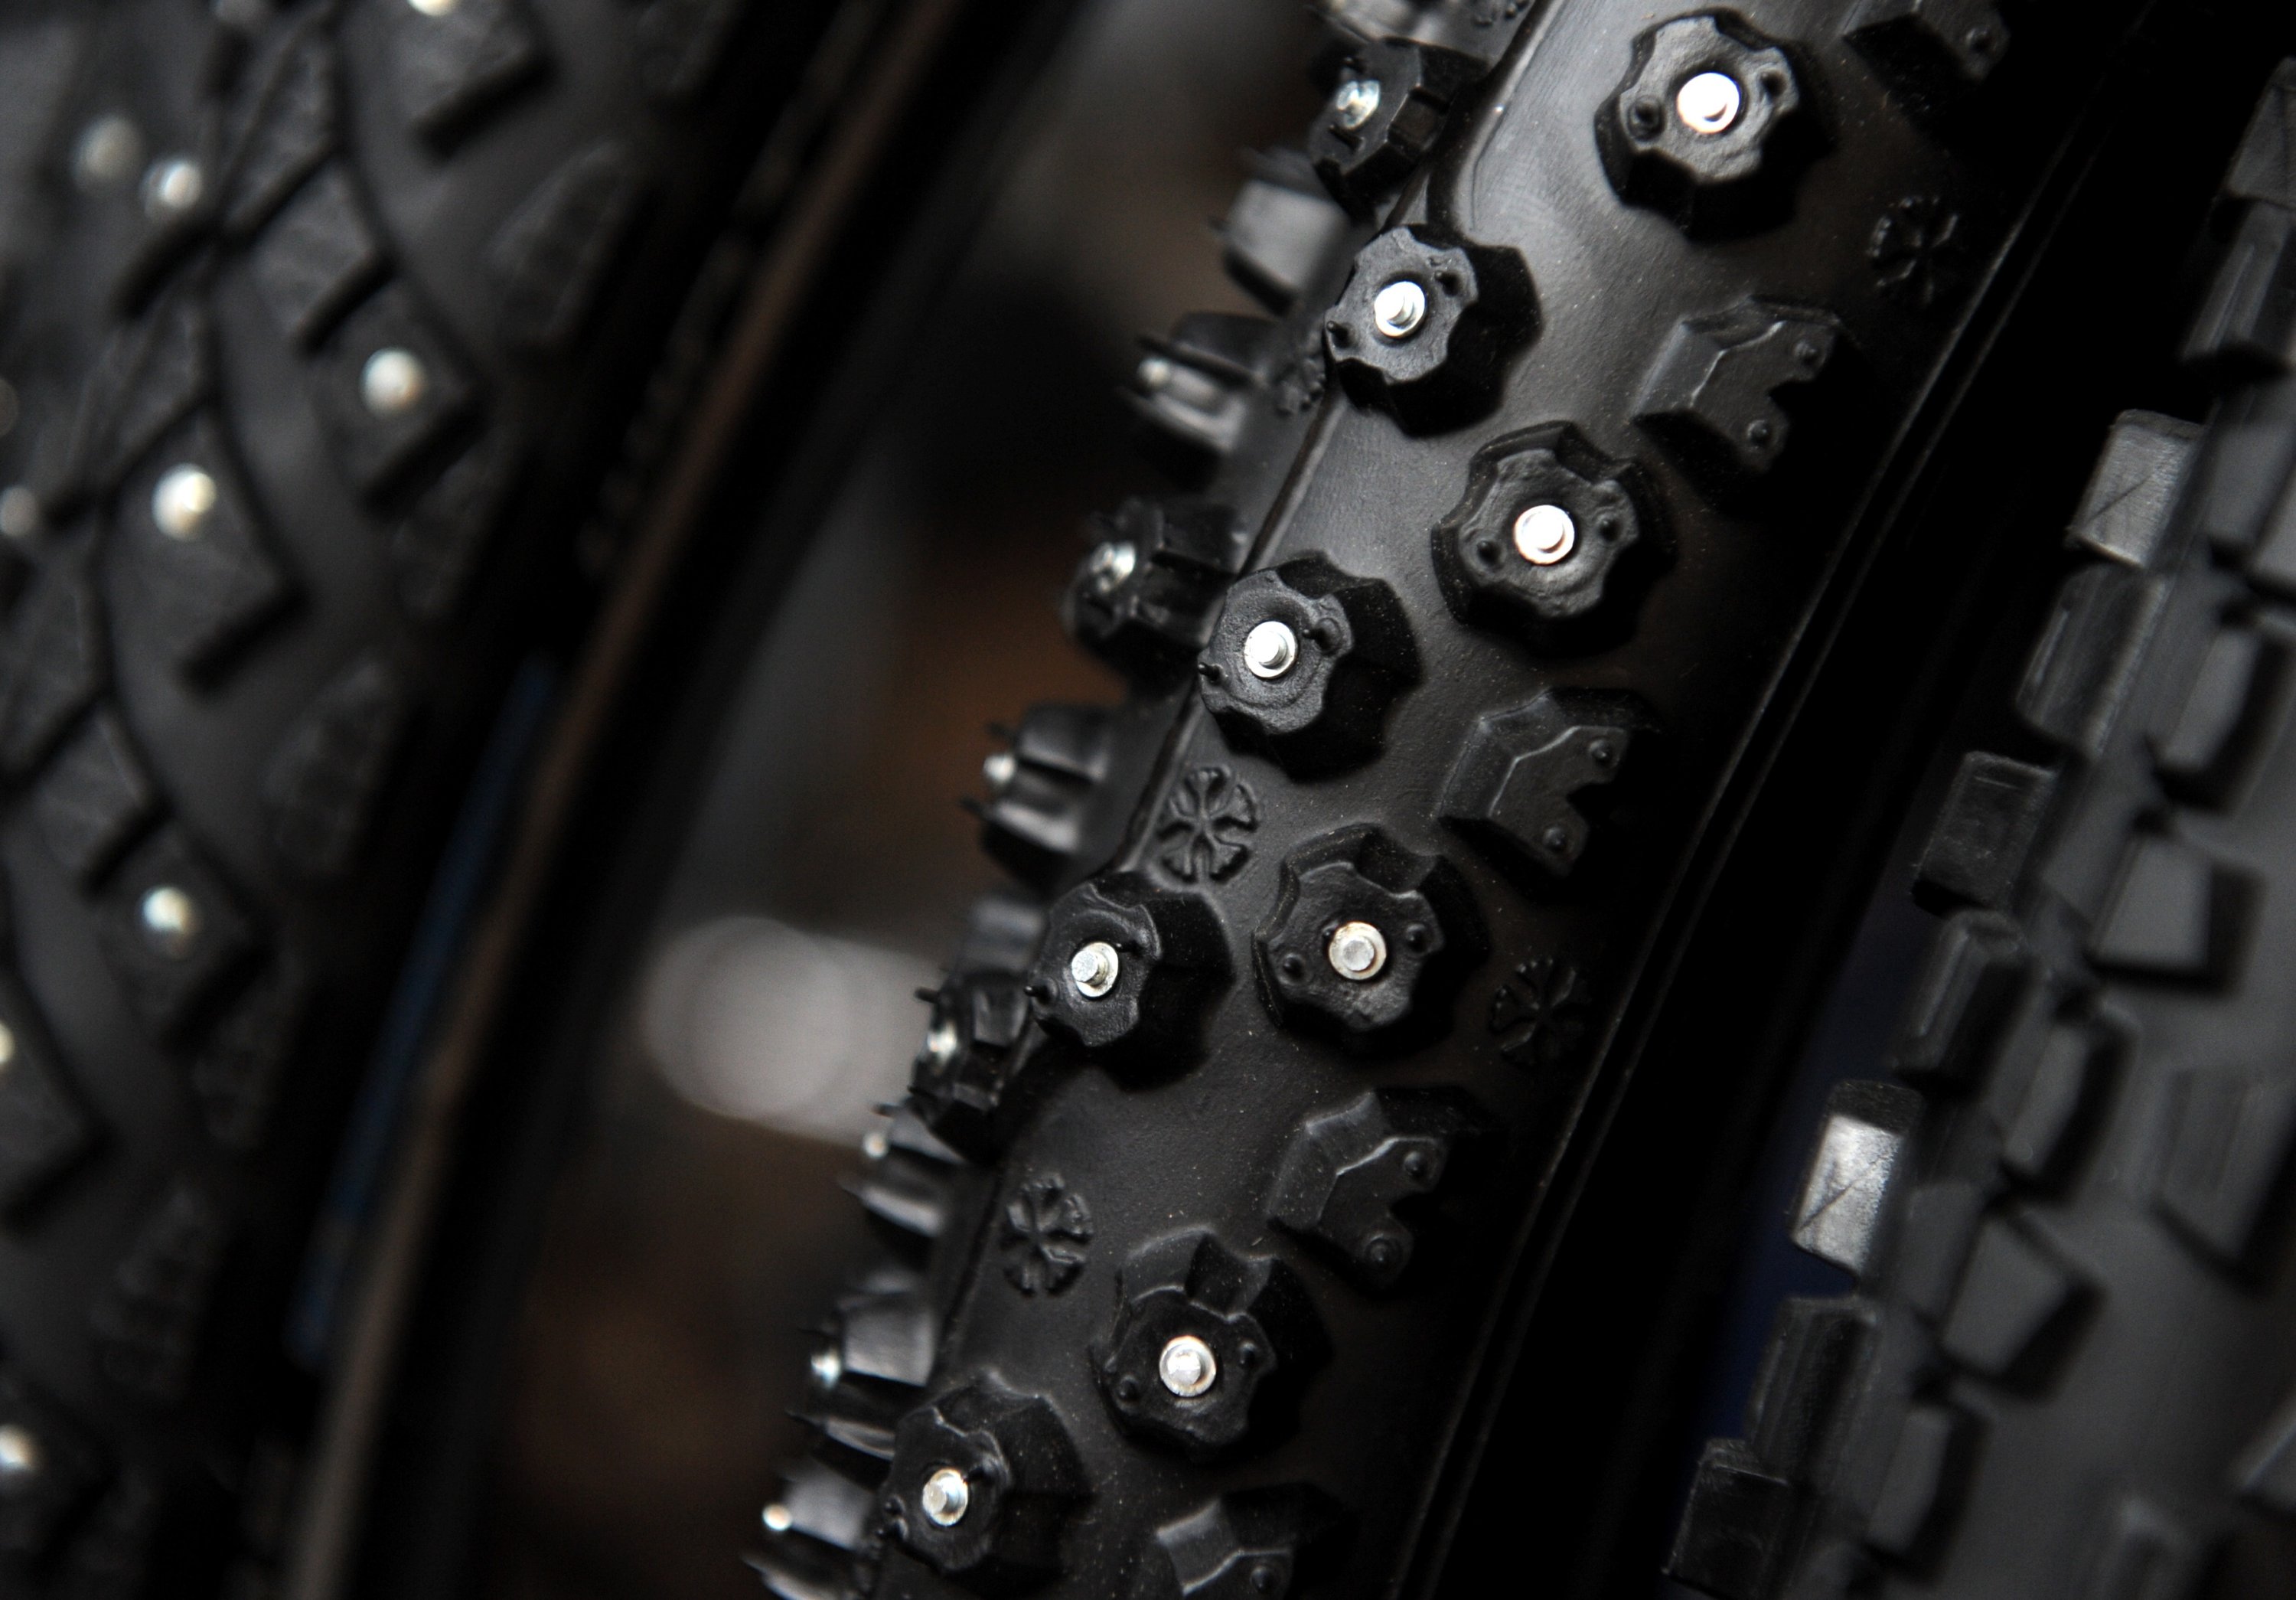 Tires with studs are also available for bicycles, for increased grip on black ice and snow. (dpa Photo)